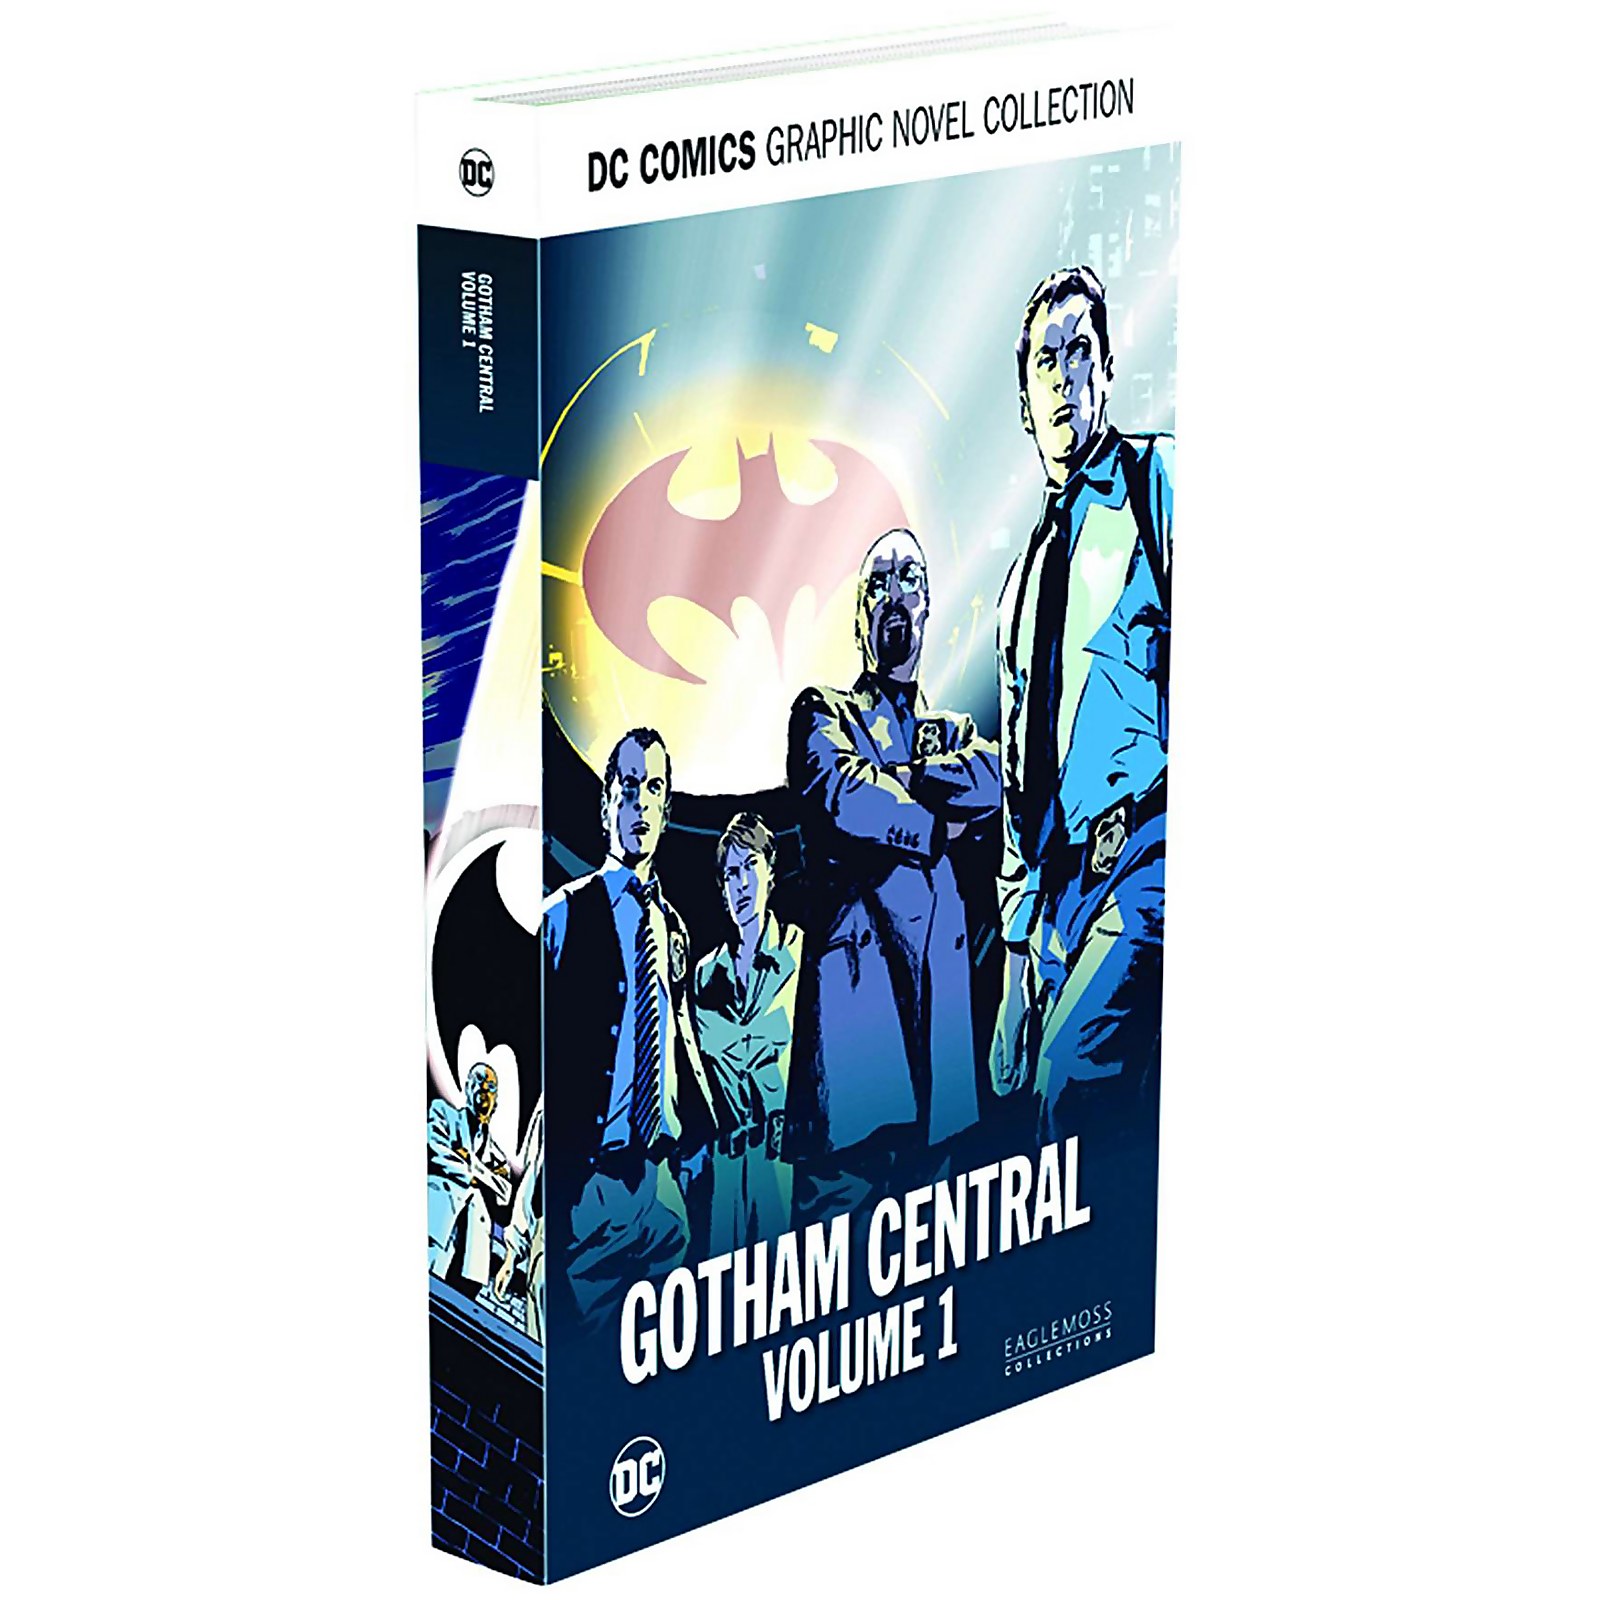 DC Graphic Novel Collection Gotham Central Volume 1